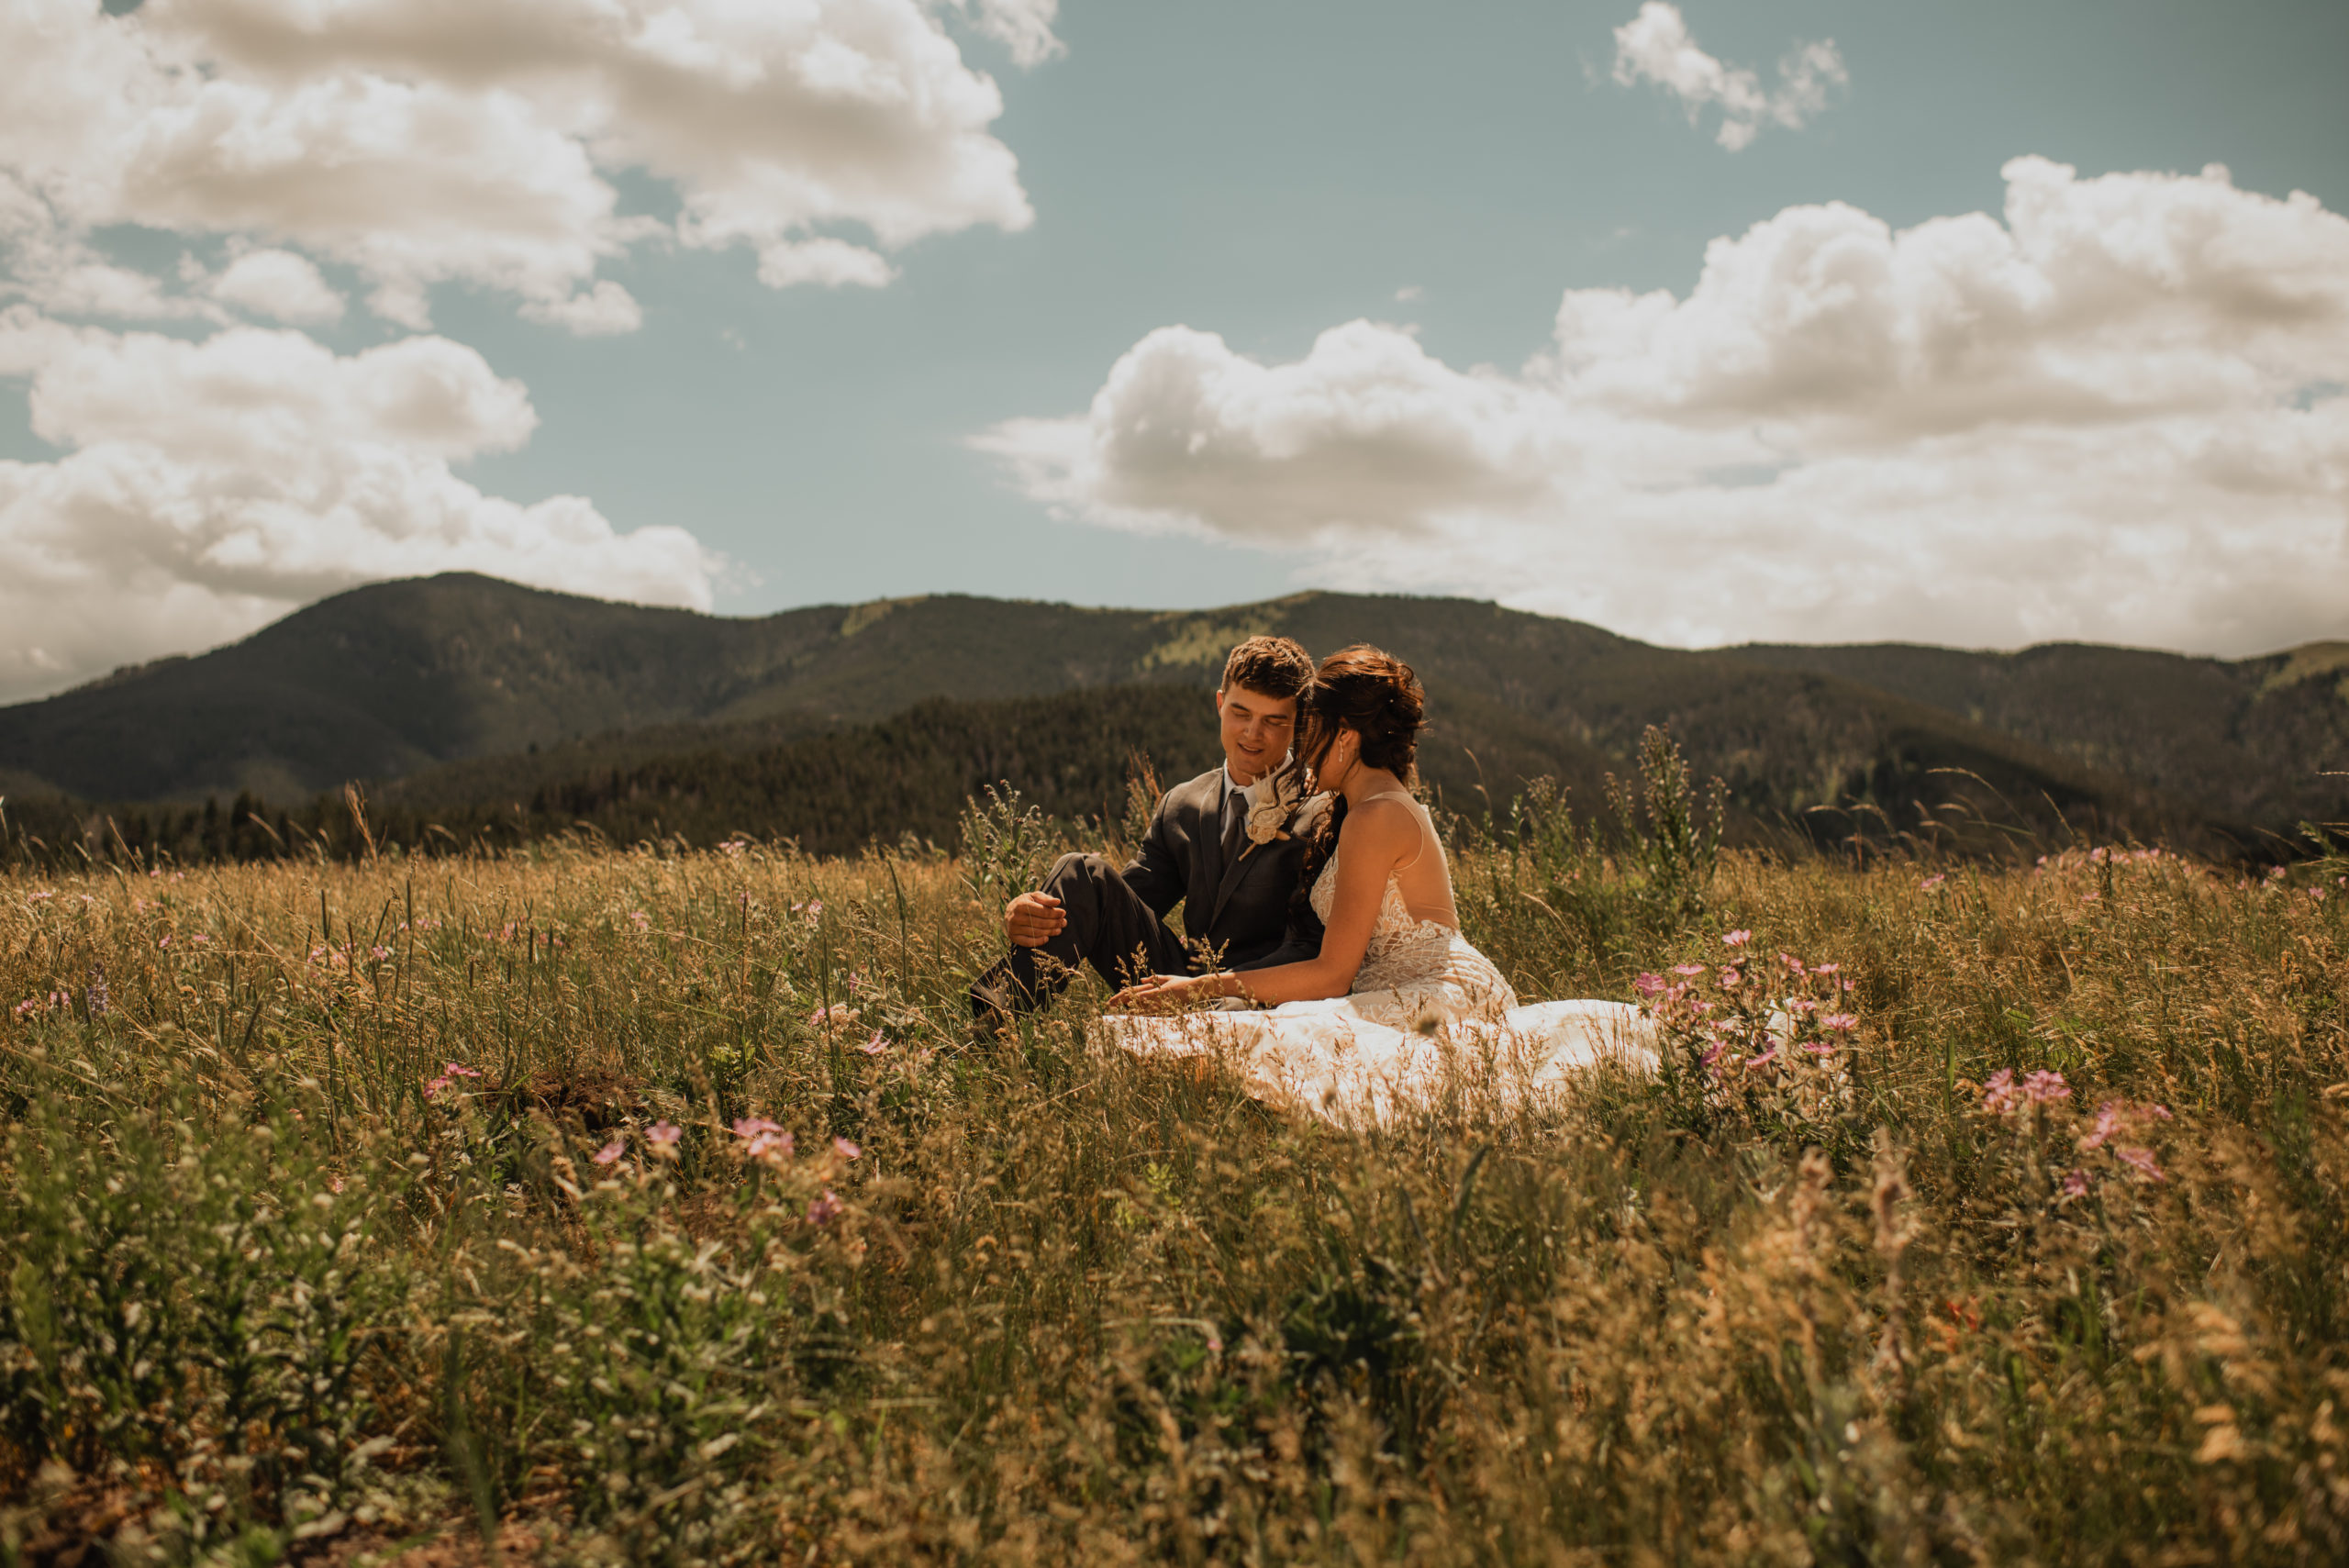 A newly married couple embracing in a field of flowers in the Highwood Mountains of Montana.